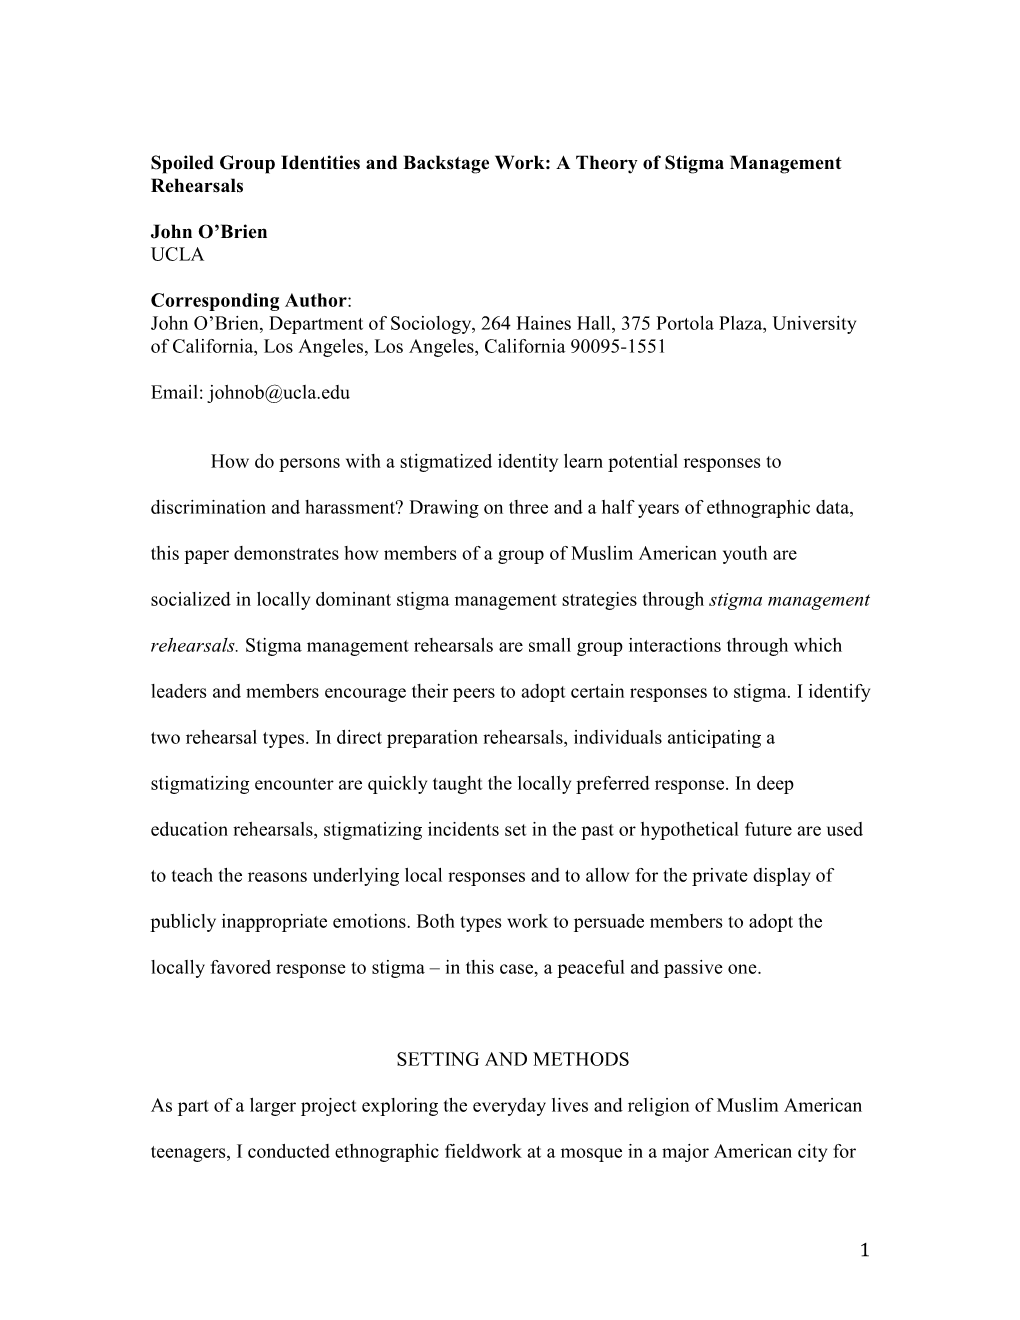 Spoiled Group Identities and Backstage Work: a Theory of Stigma Management Rehearsals